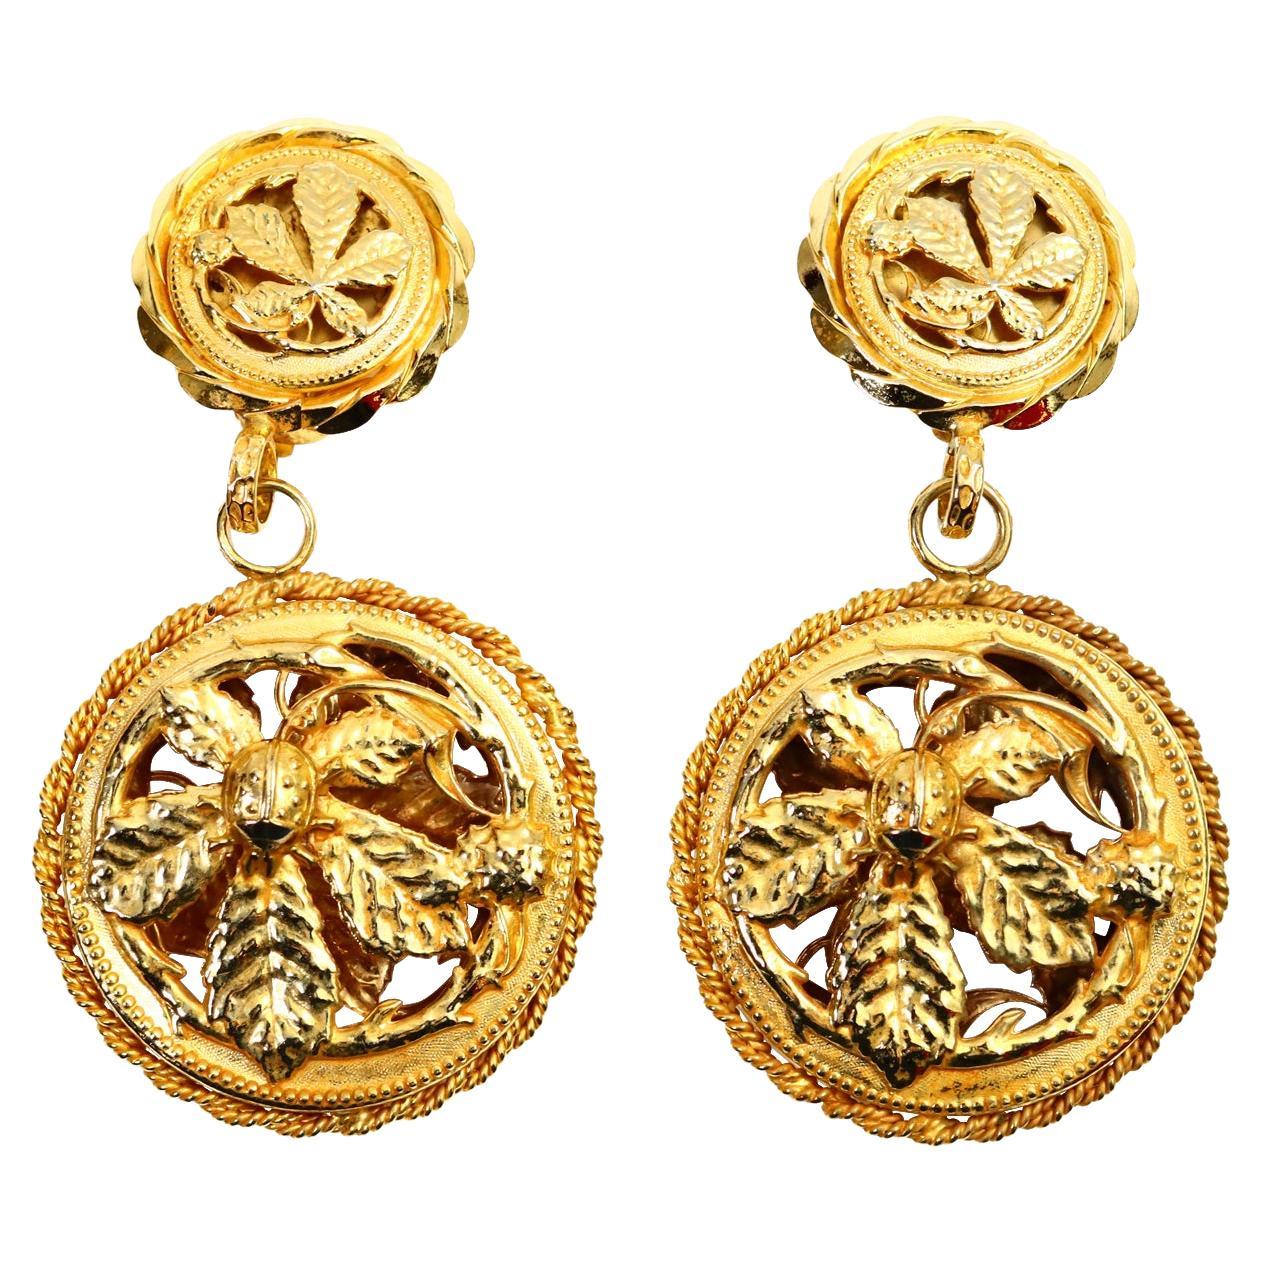 Vintage Philipe Farrandis Dangling Gold Tone Earrings Circa 1980s.  These are so chic. Looks like a plant with a small ladybug on the plant though not really easy to detect. A spectacular piece. Front Facing and Bold with Quite a look. Clip On.

THE